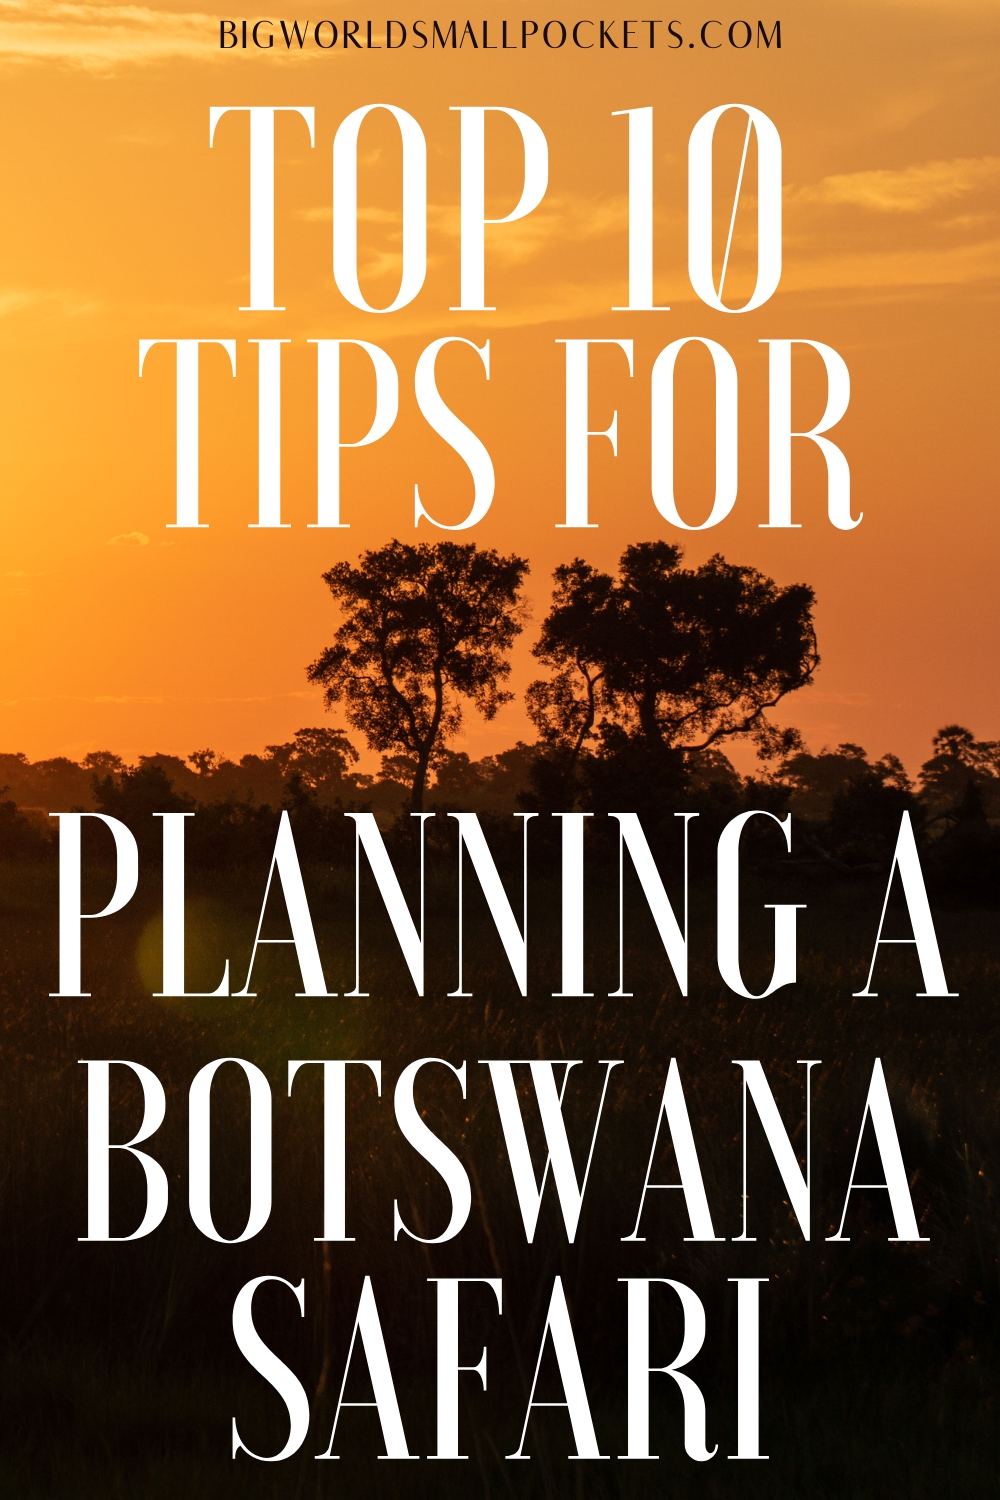 Top 10 Tips for Planning a Safari in Botswana